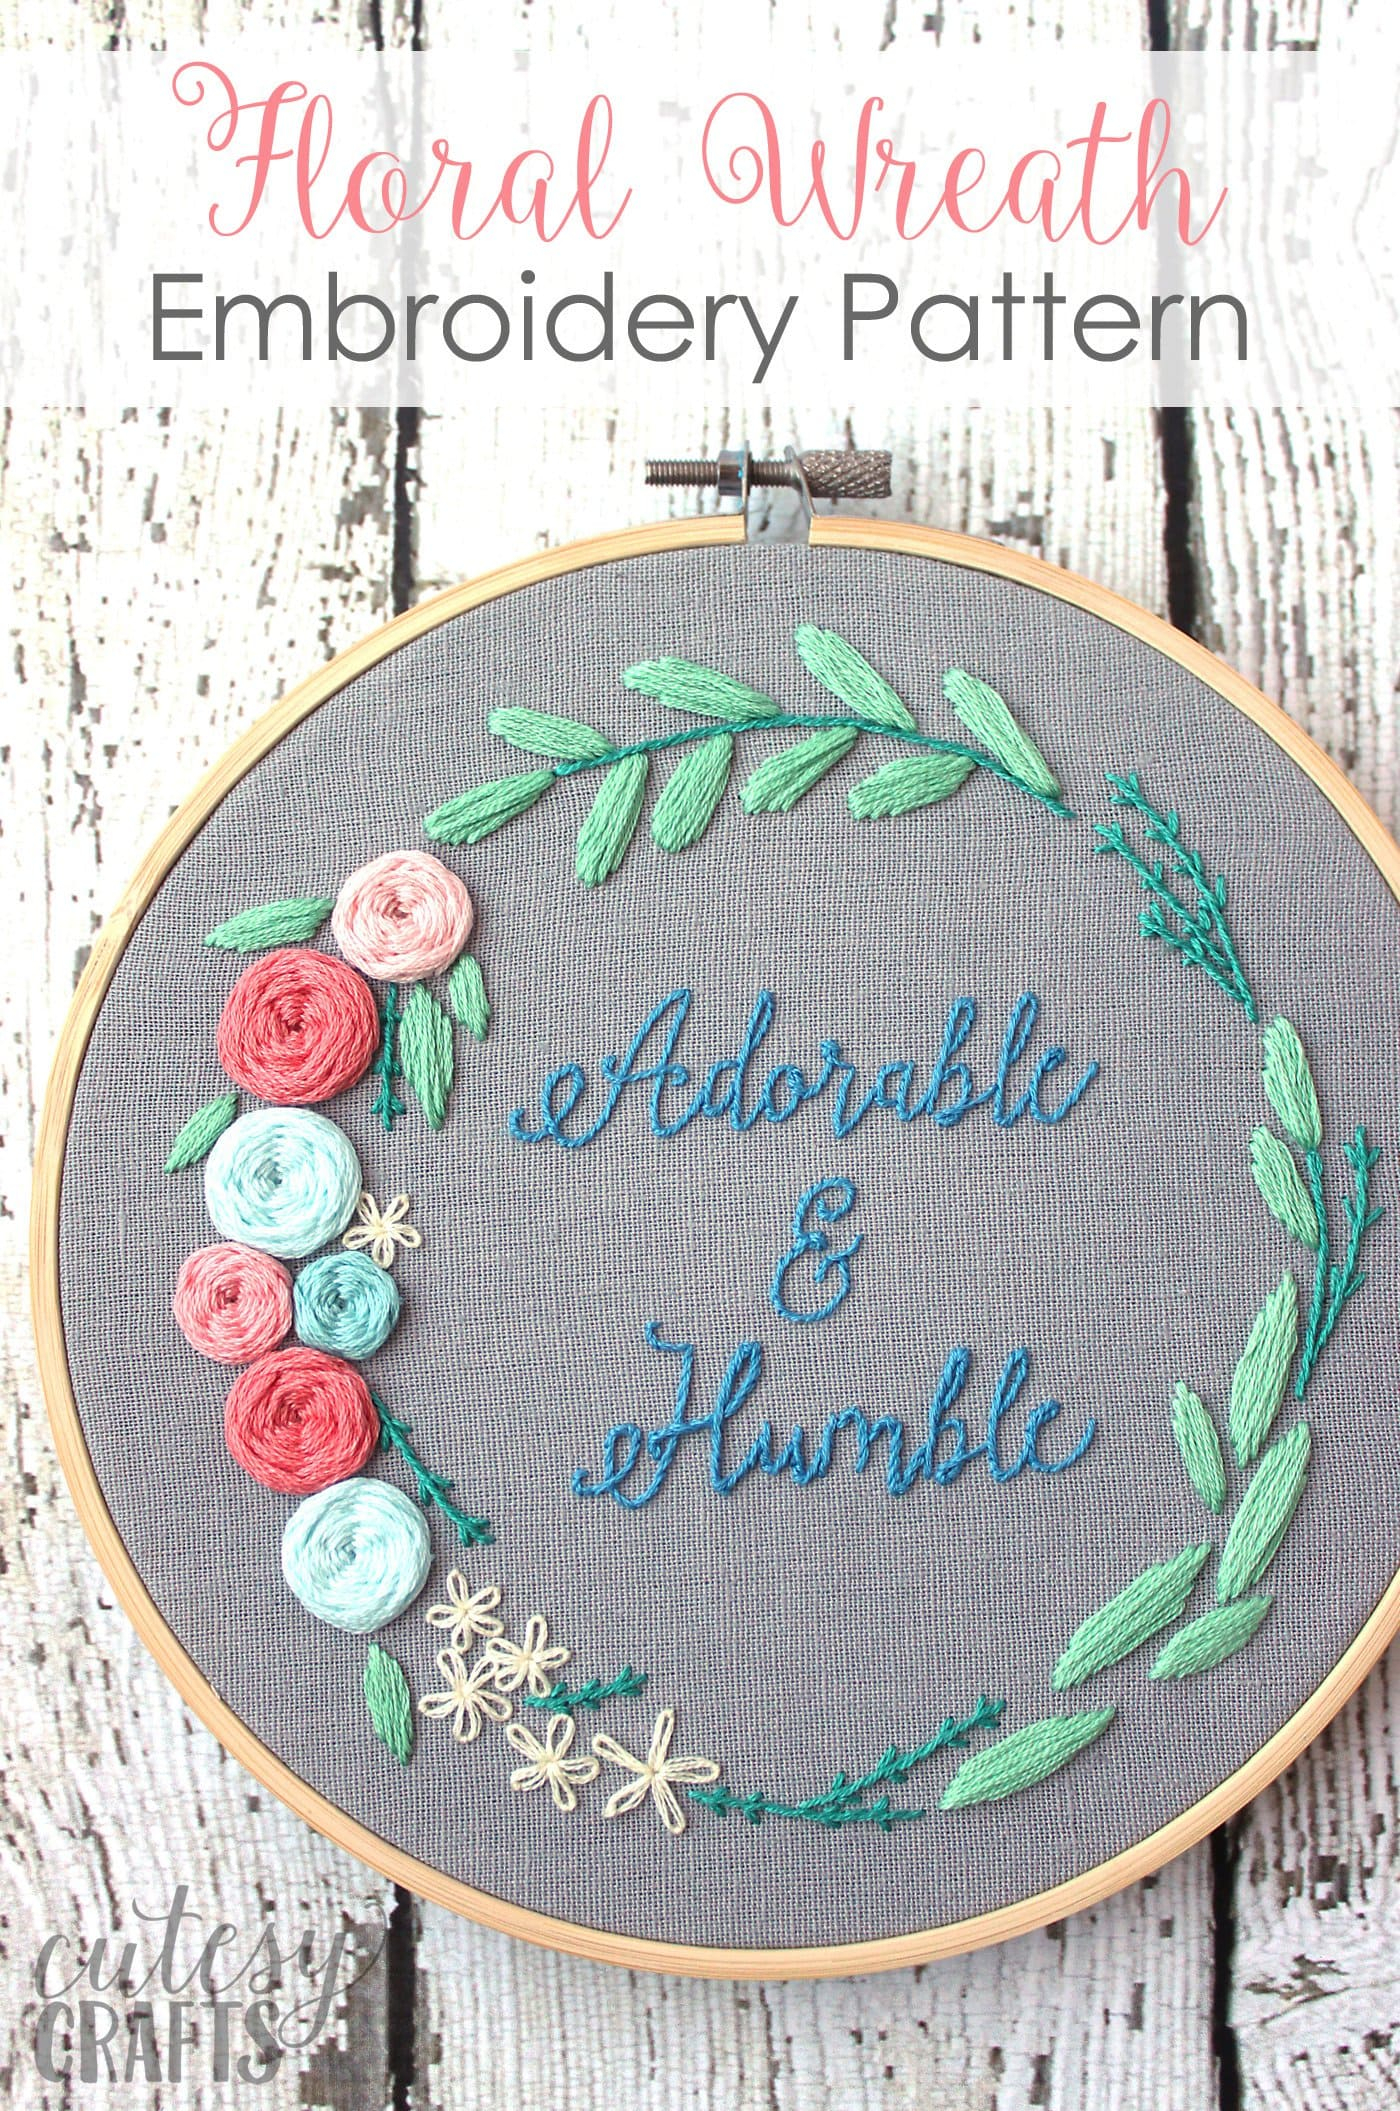 Free Hand Embroidery Patterns To Print Adorable And Humble Free Floral Wreath Hand Embroidery Pattern